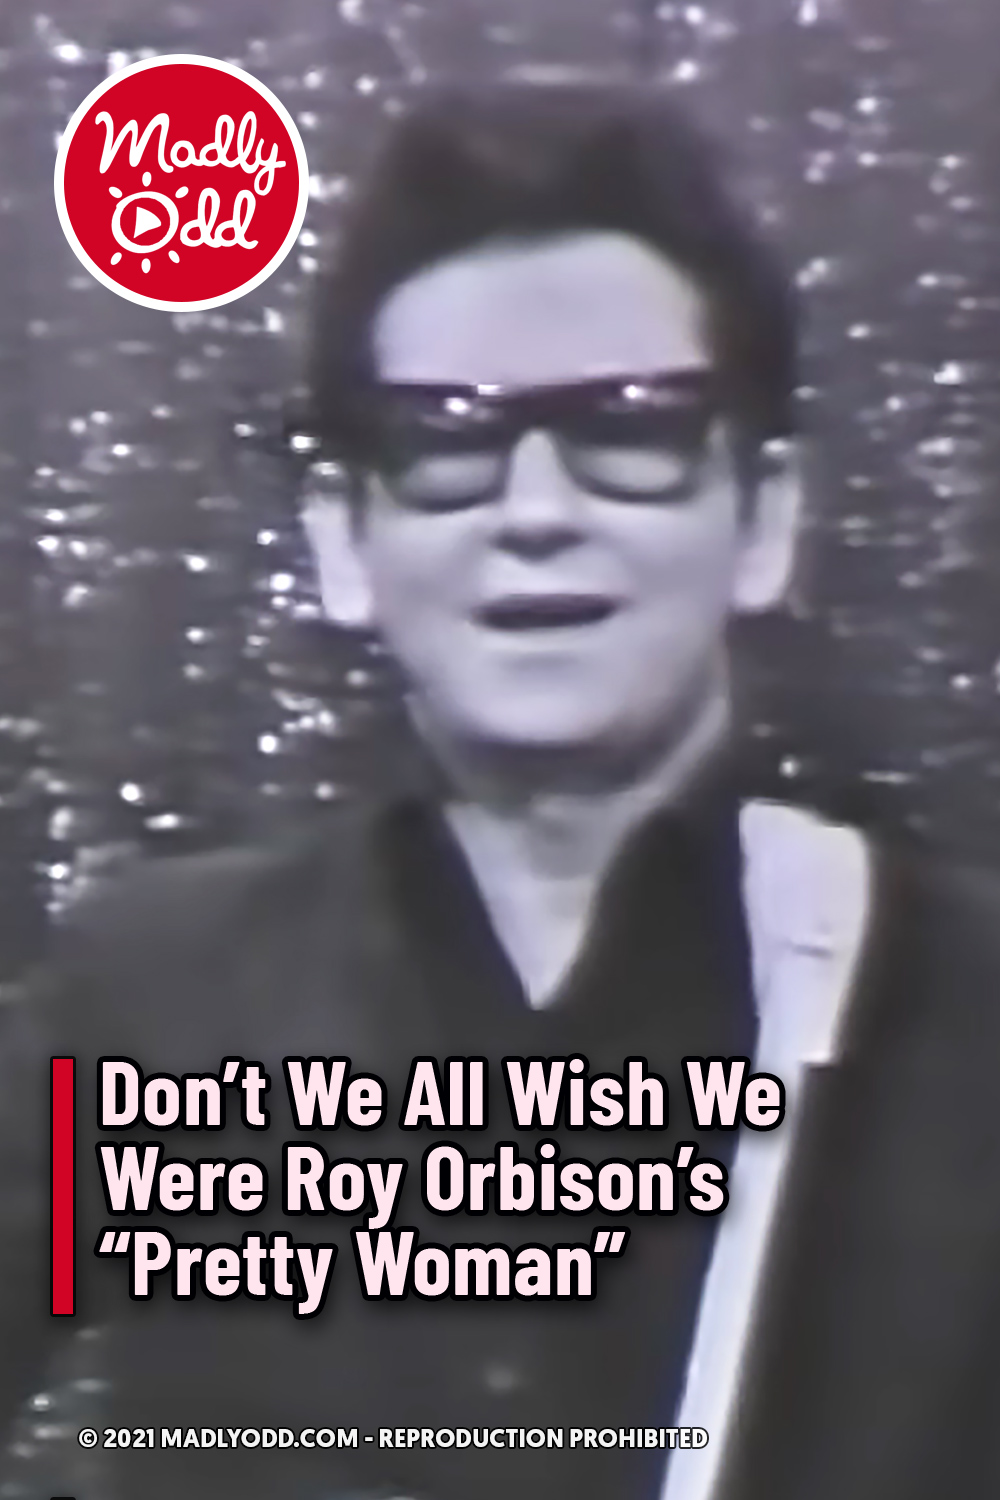 Don’t We All Wish We Were Roy Orbison’s “Pretty Woman”